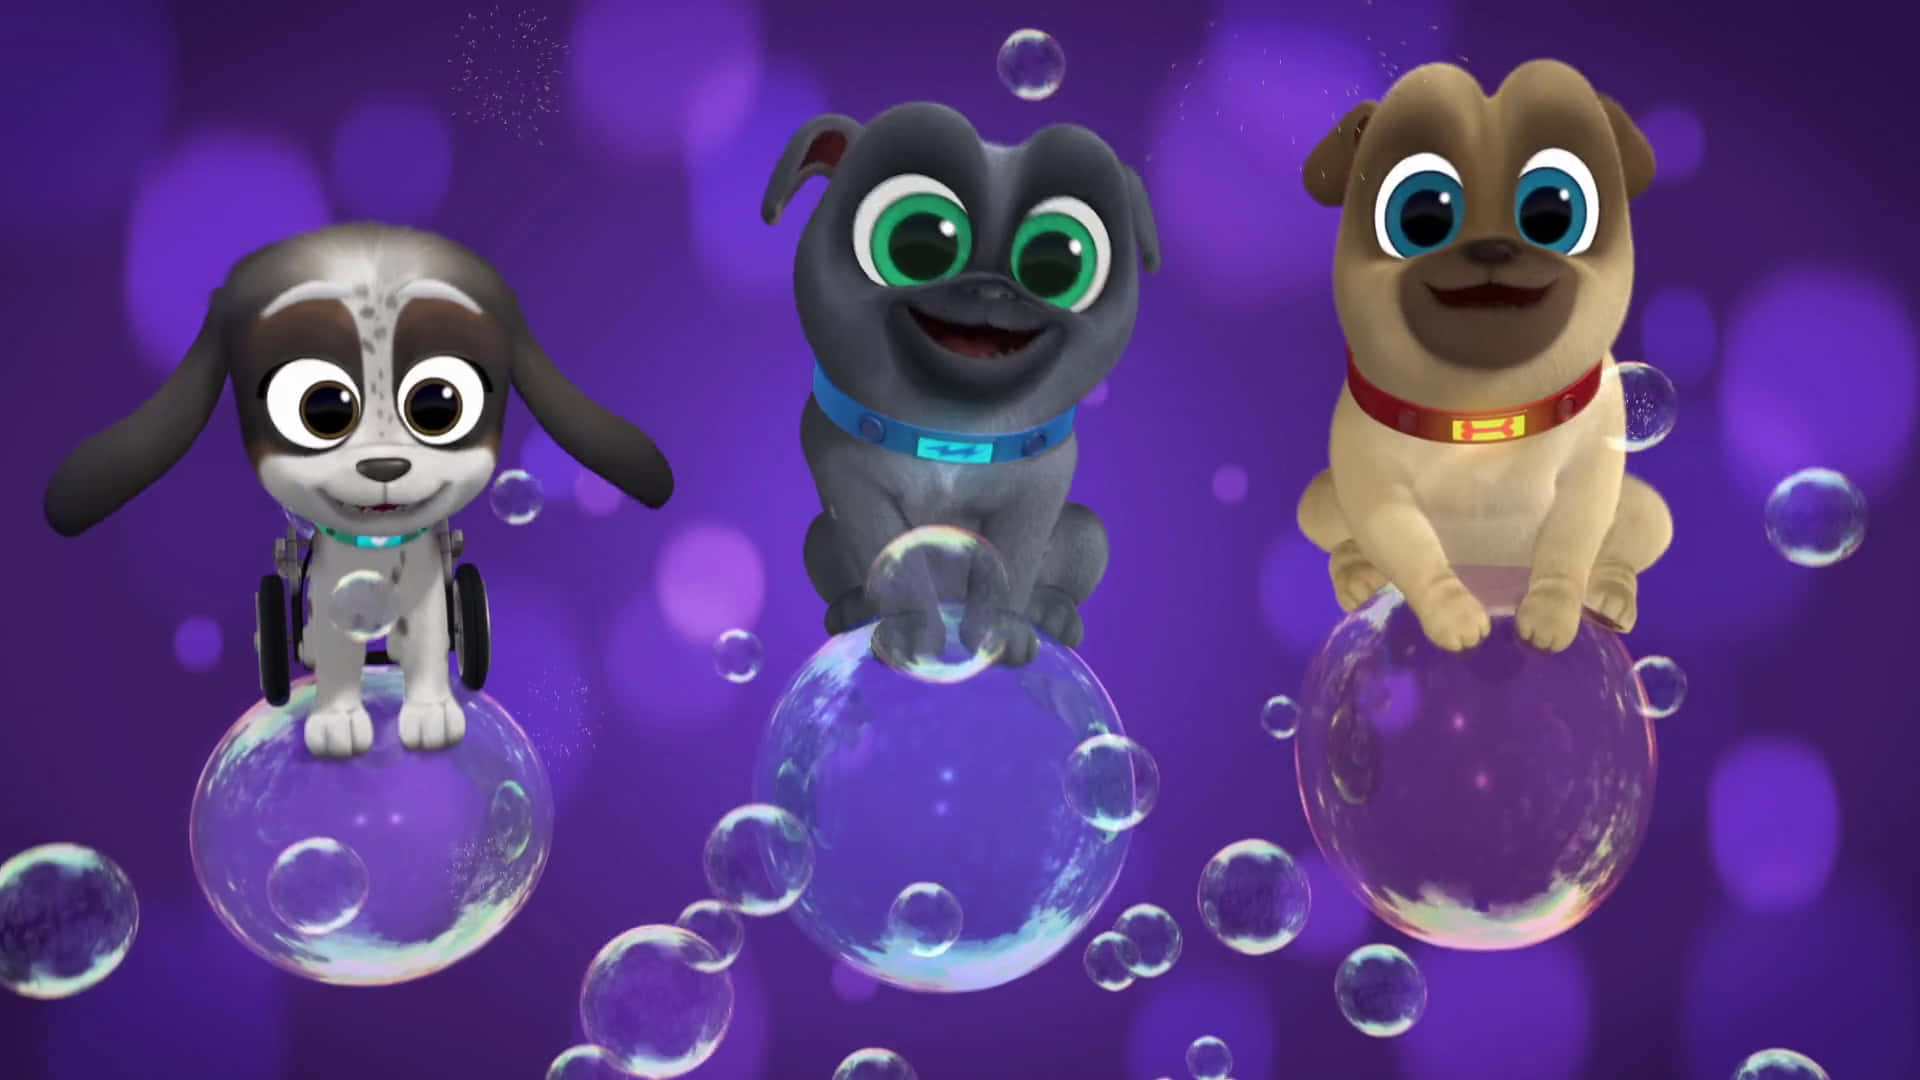 Bingo And Rolly From Puppy Dog Pals Wallpaper